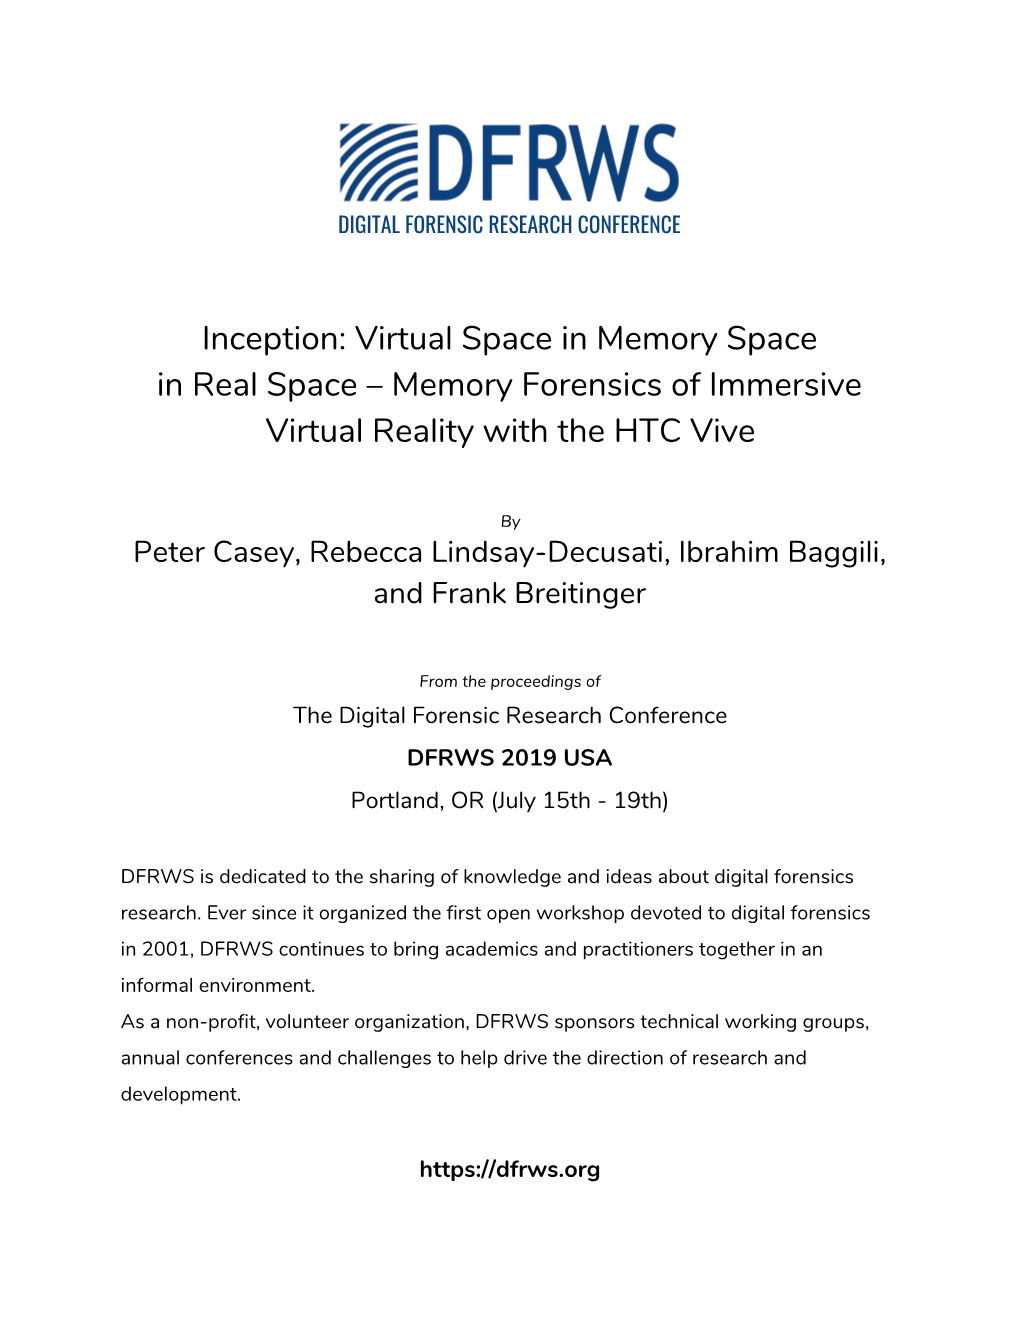 Memory Forensics of Immersive Virtual Reality with the HTC Vive